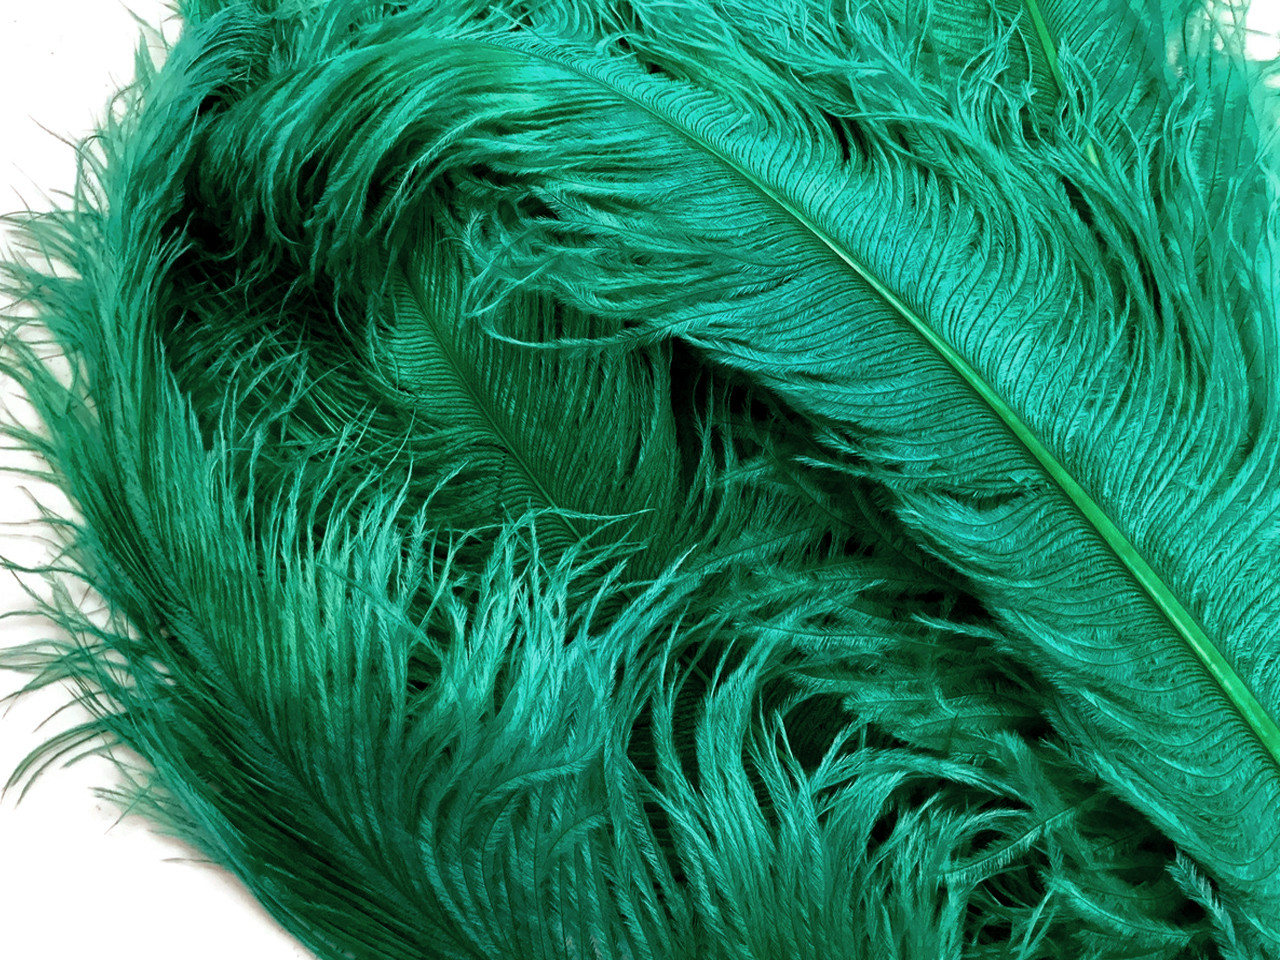 1/2 Lb. - 25-29 Teal Green Large Ostrich Wing Plume Wholesale Feathers  (Bulk)